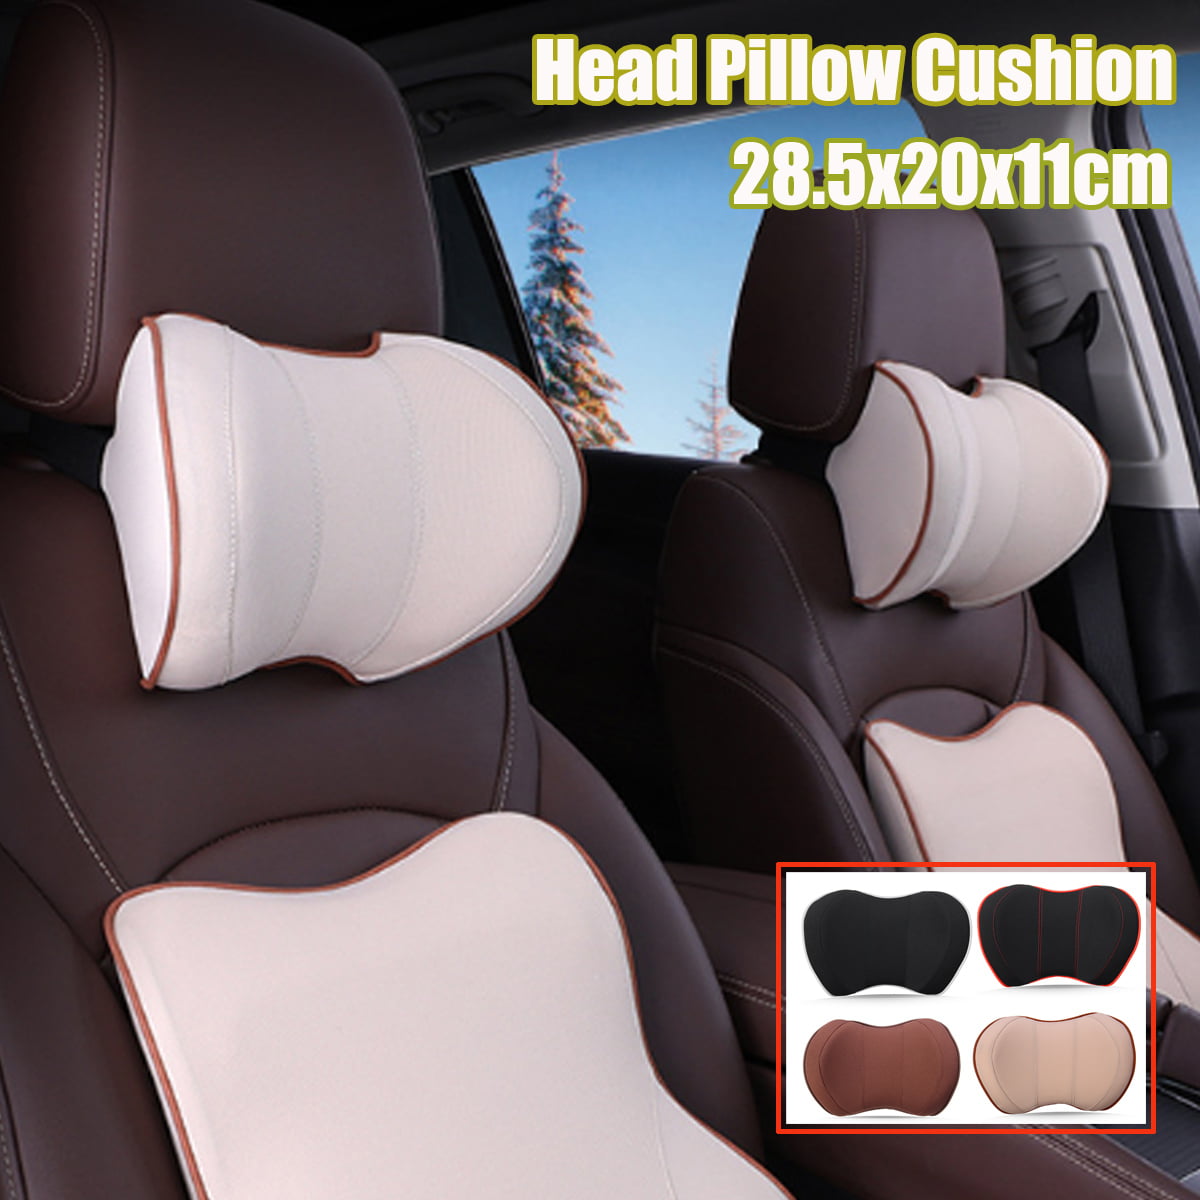 360 ° Back-Forth Rotation Anholi Car Seat Headrest Pillow,Thickening Memory Foam,Roal pal car Sleeping Head Support,Washable Coat,Neck Rest for Kids and Passenger Left-Right Width Adjustable Beige）